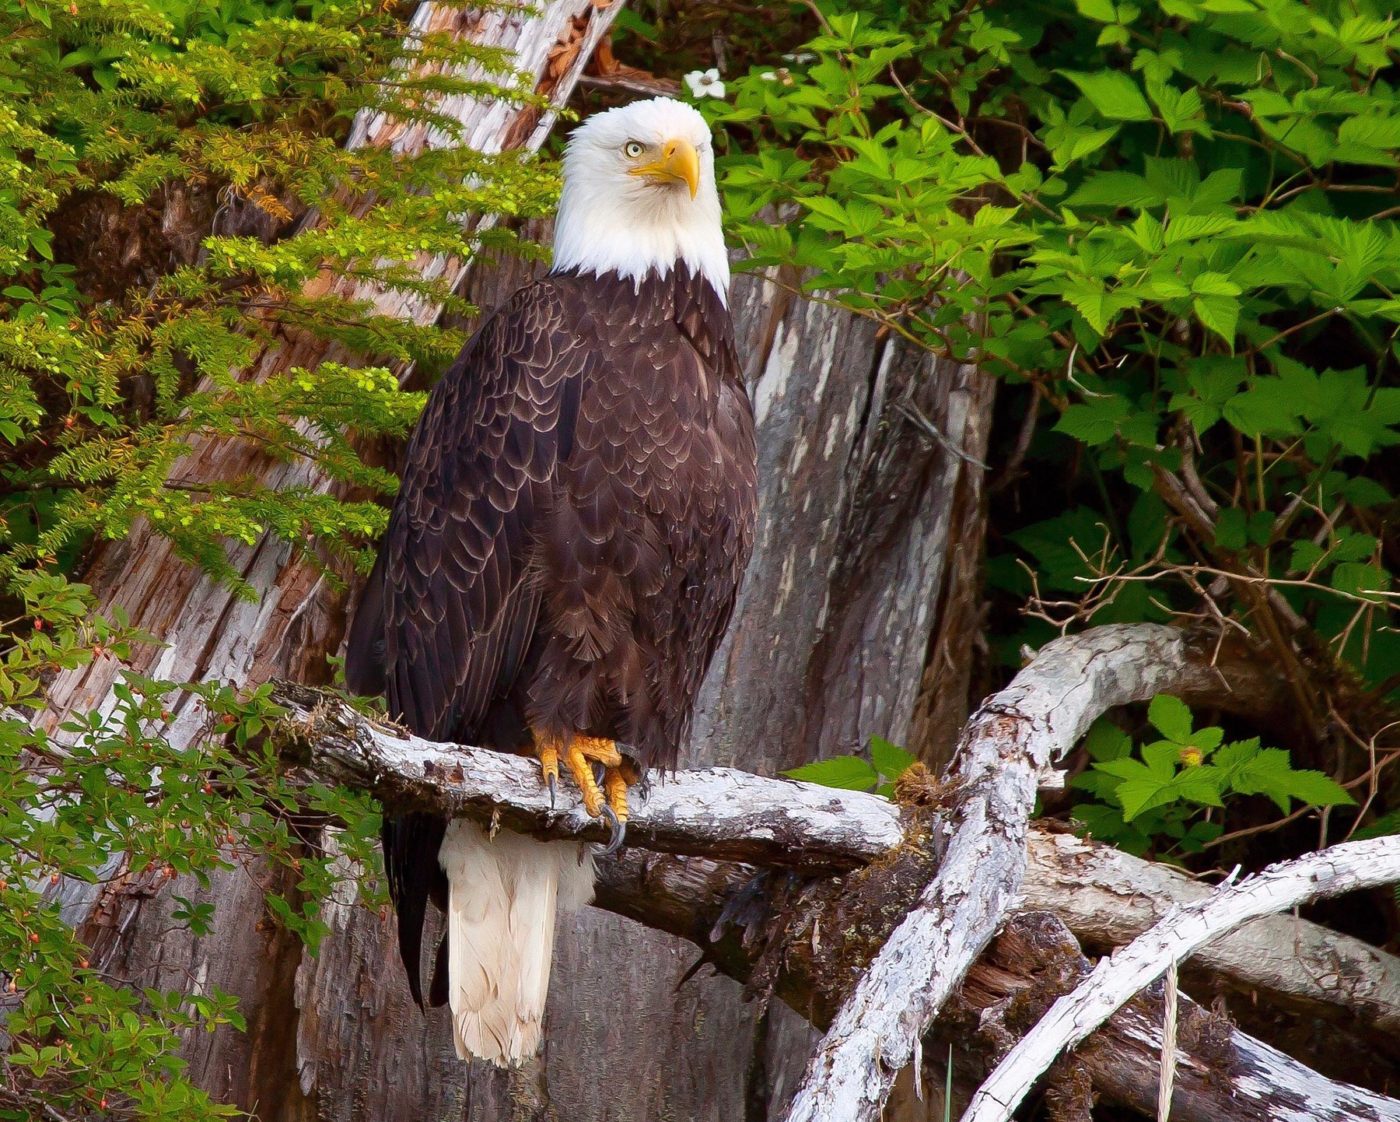 Bald eagle perched on a branch.